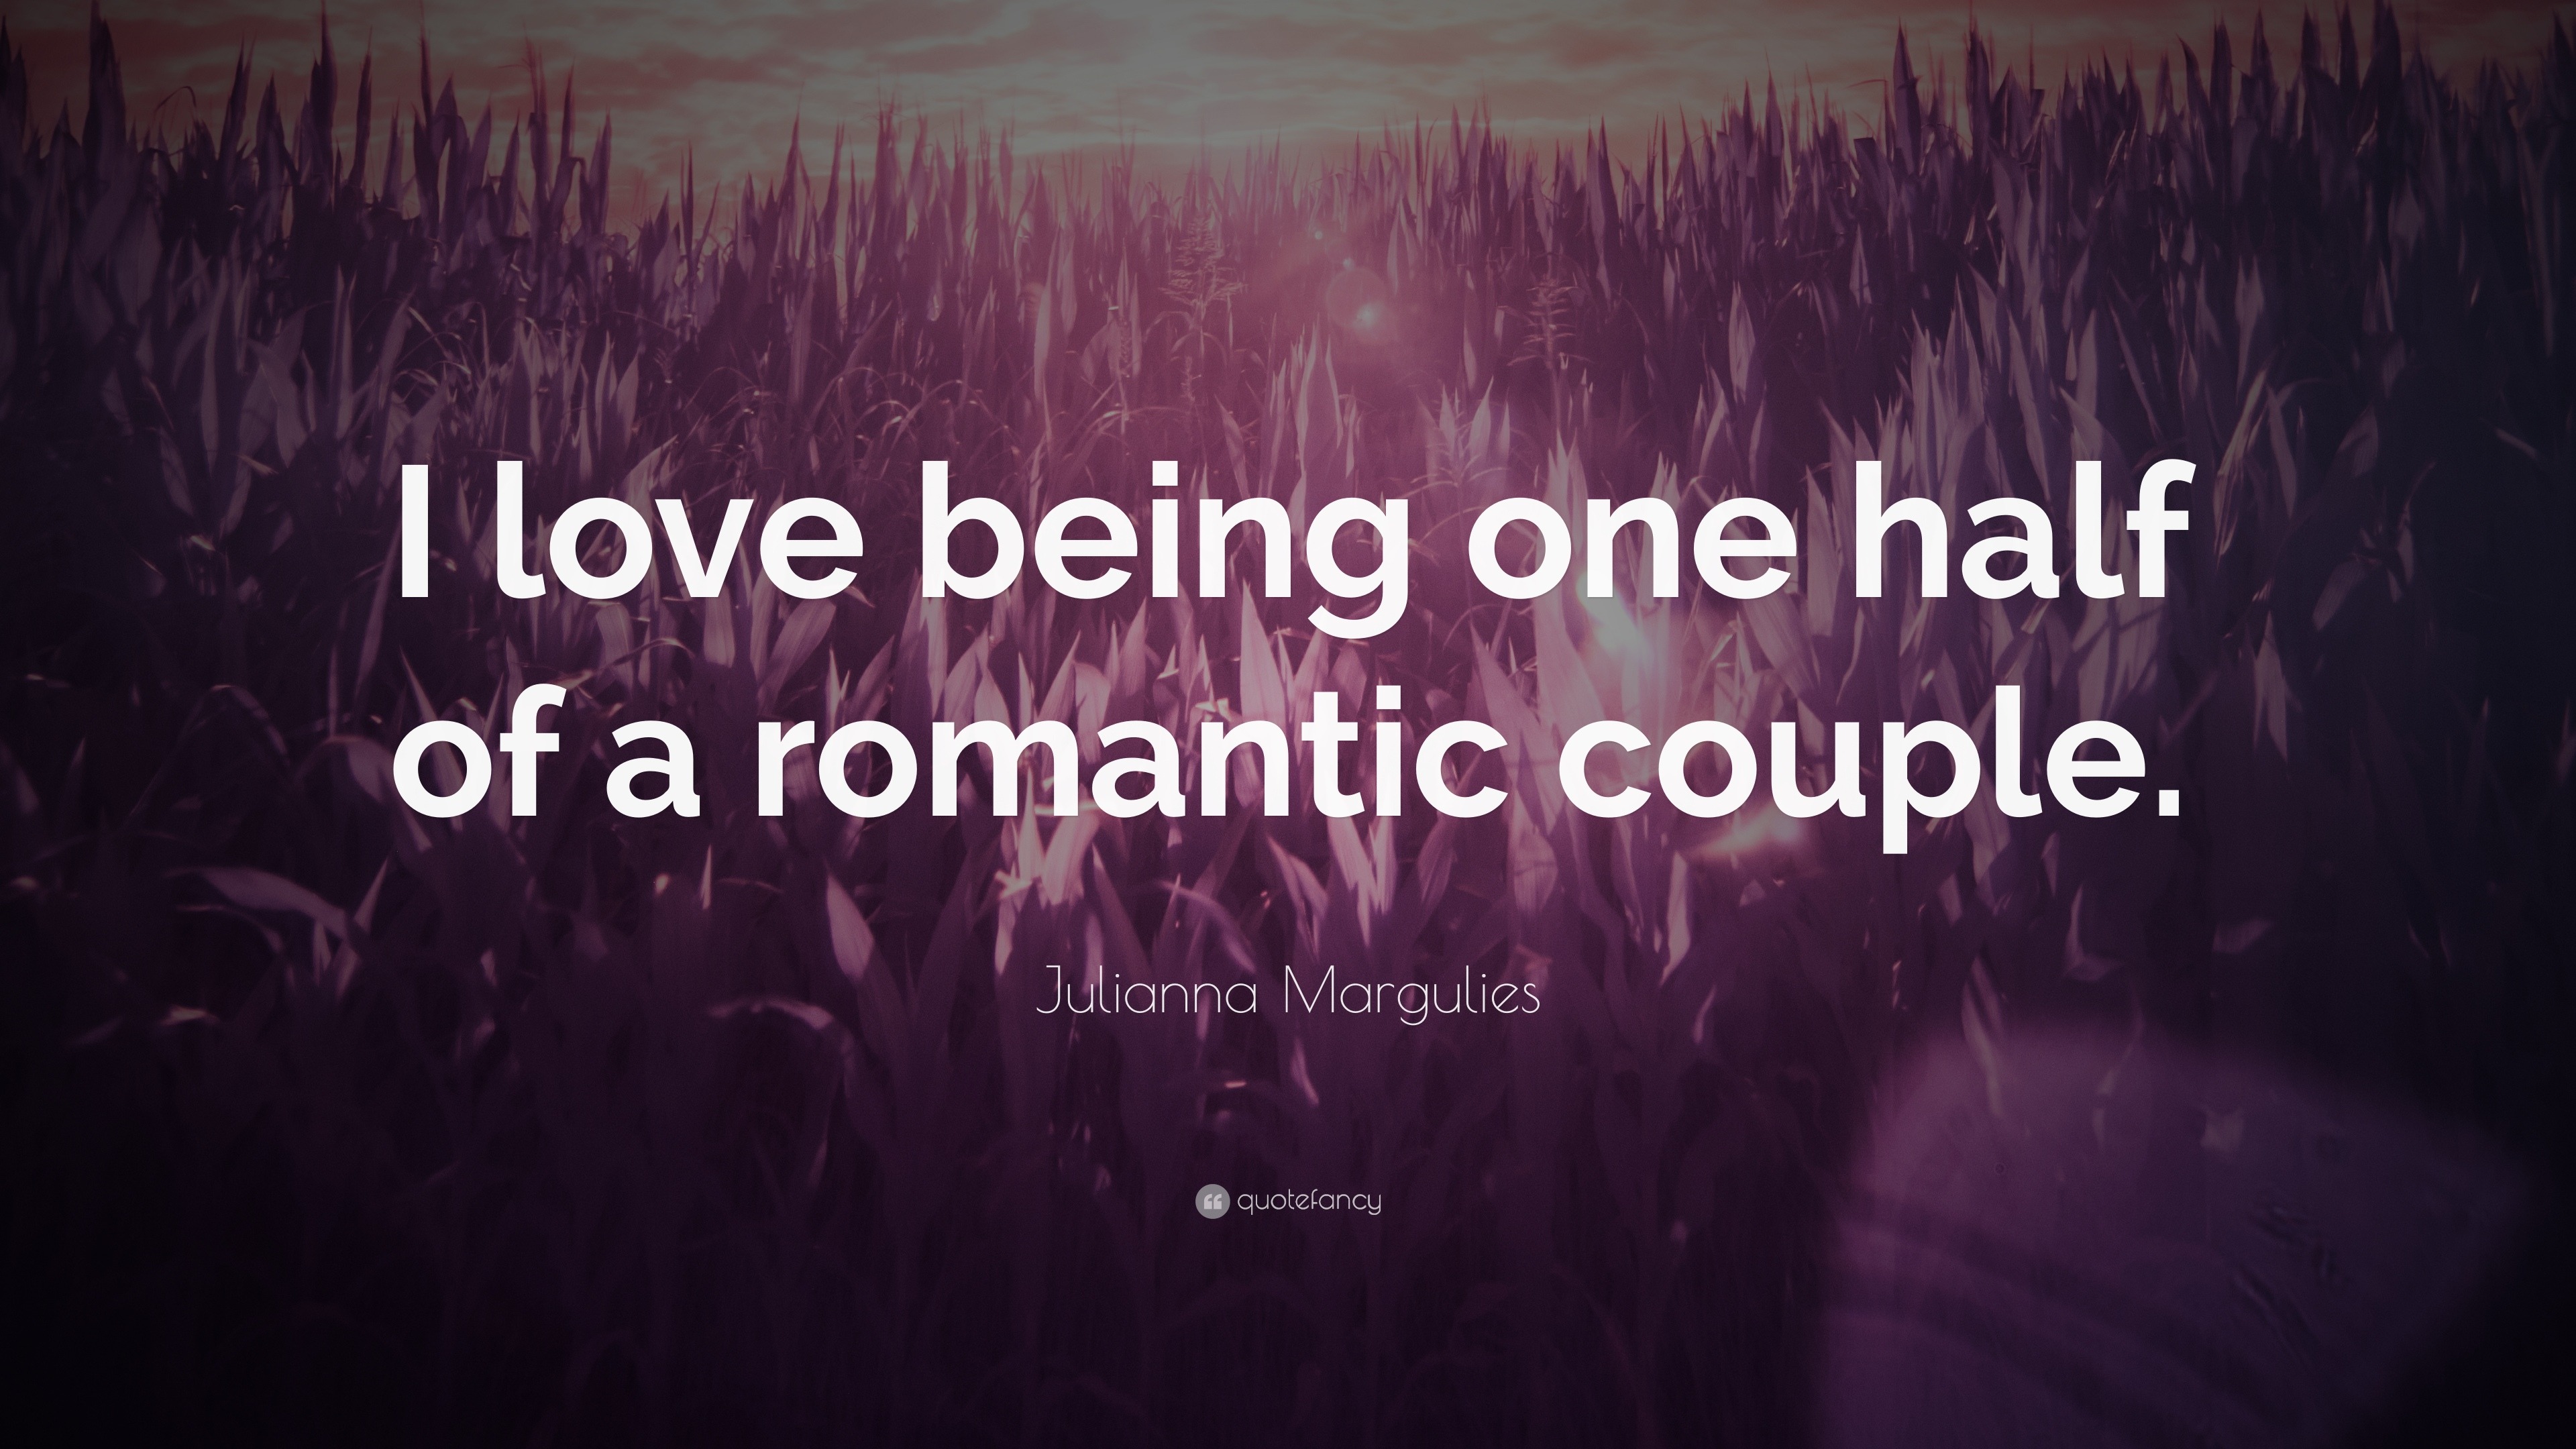 Julianna Margulies Quote: “I love being one half of a romantic